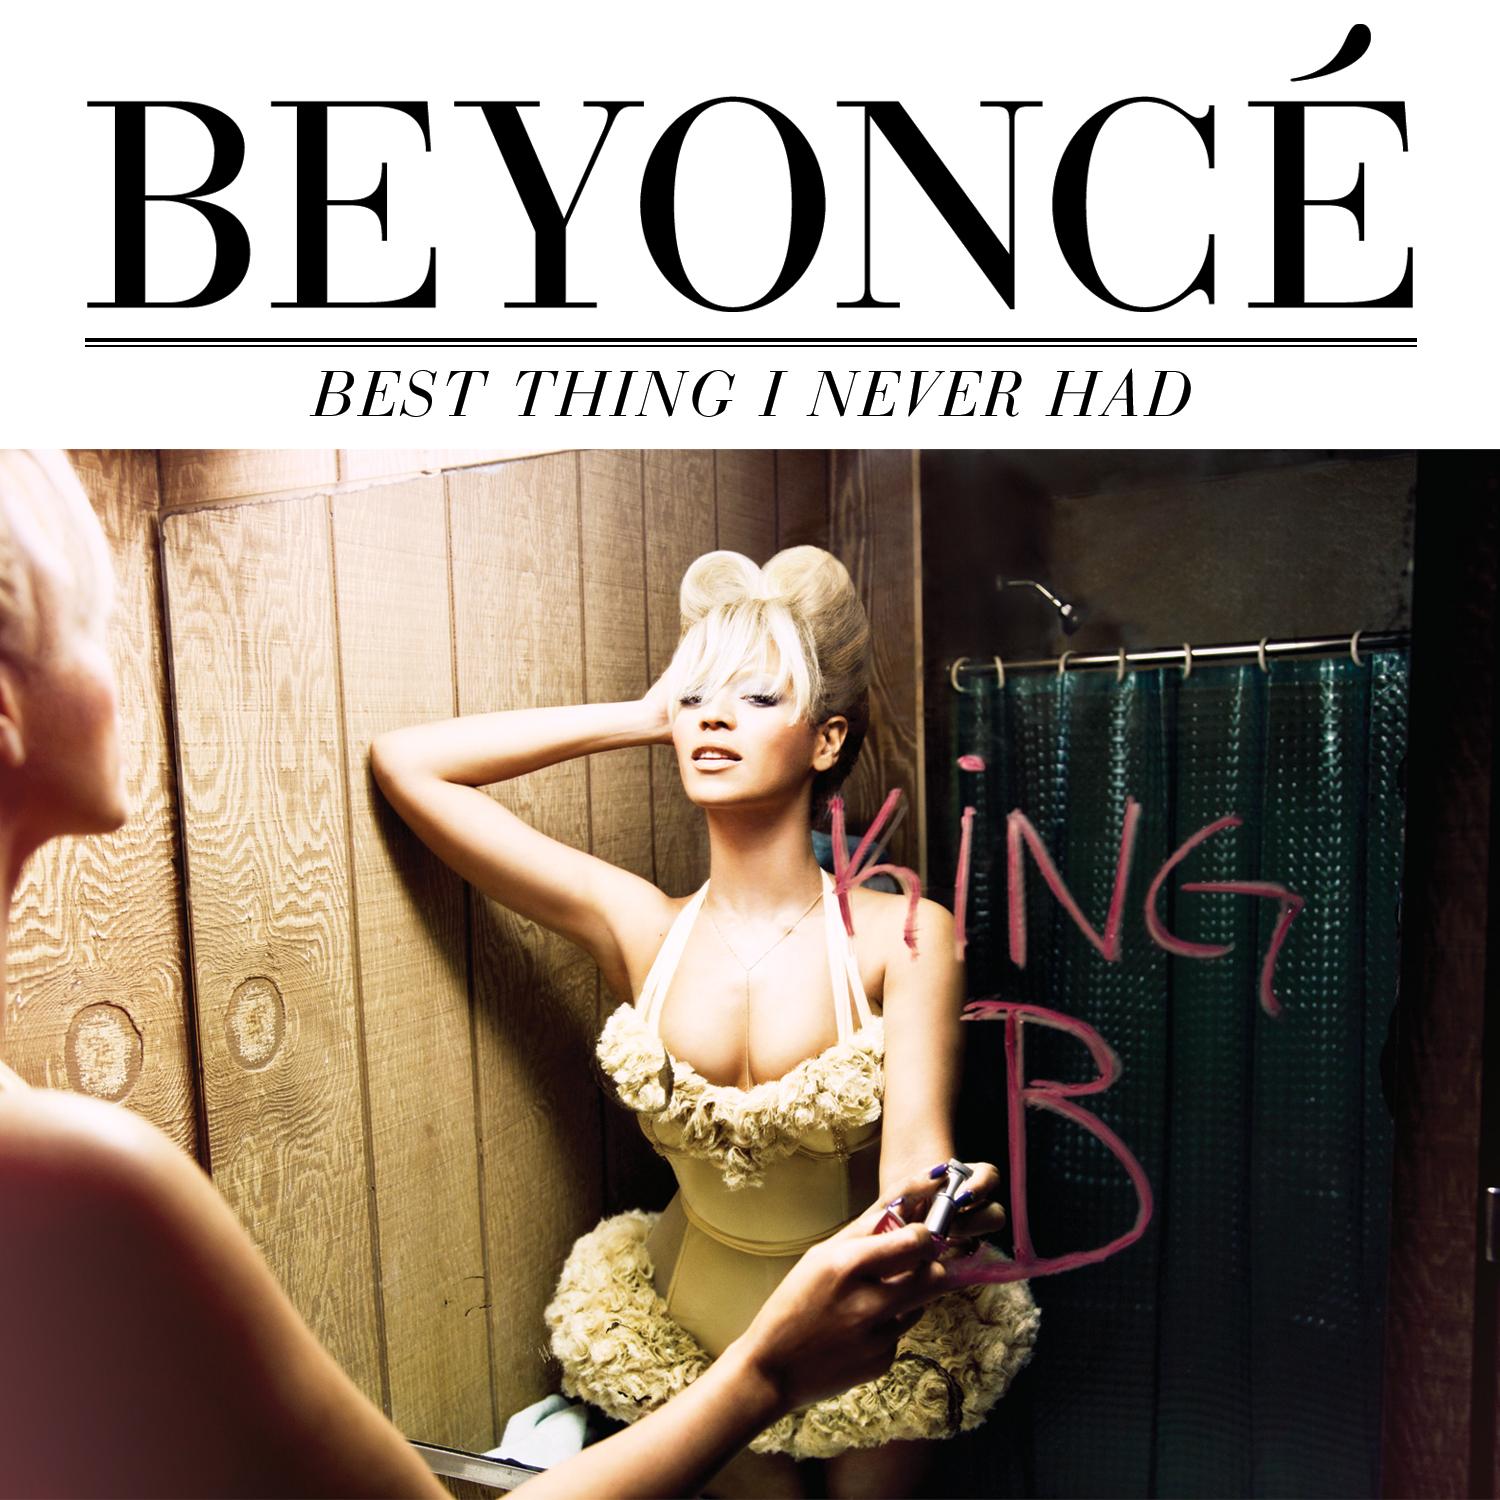 Beyonce - Best Thing I Never Had (Moguai Remix)